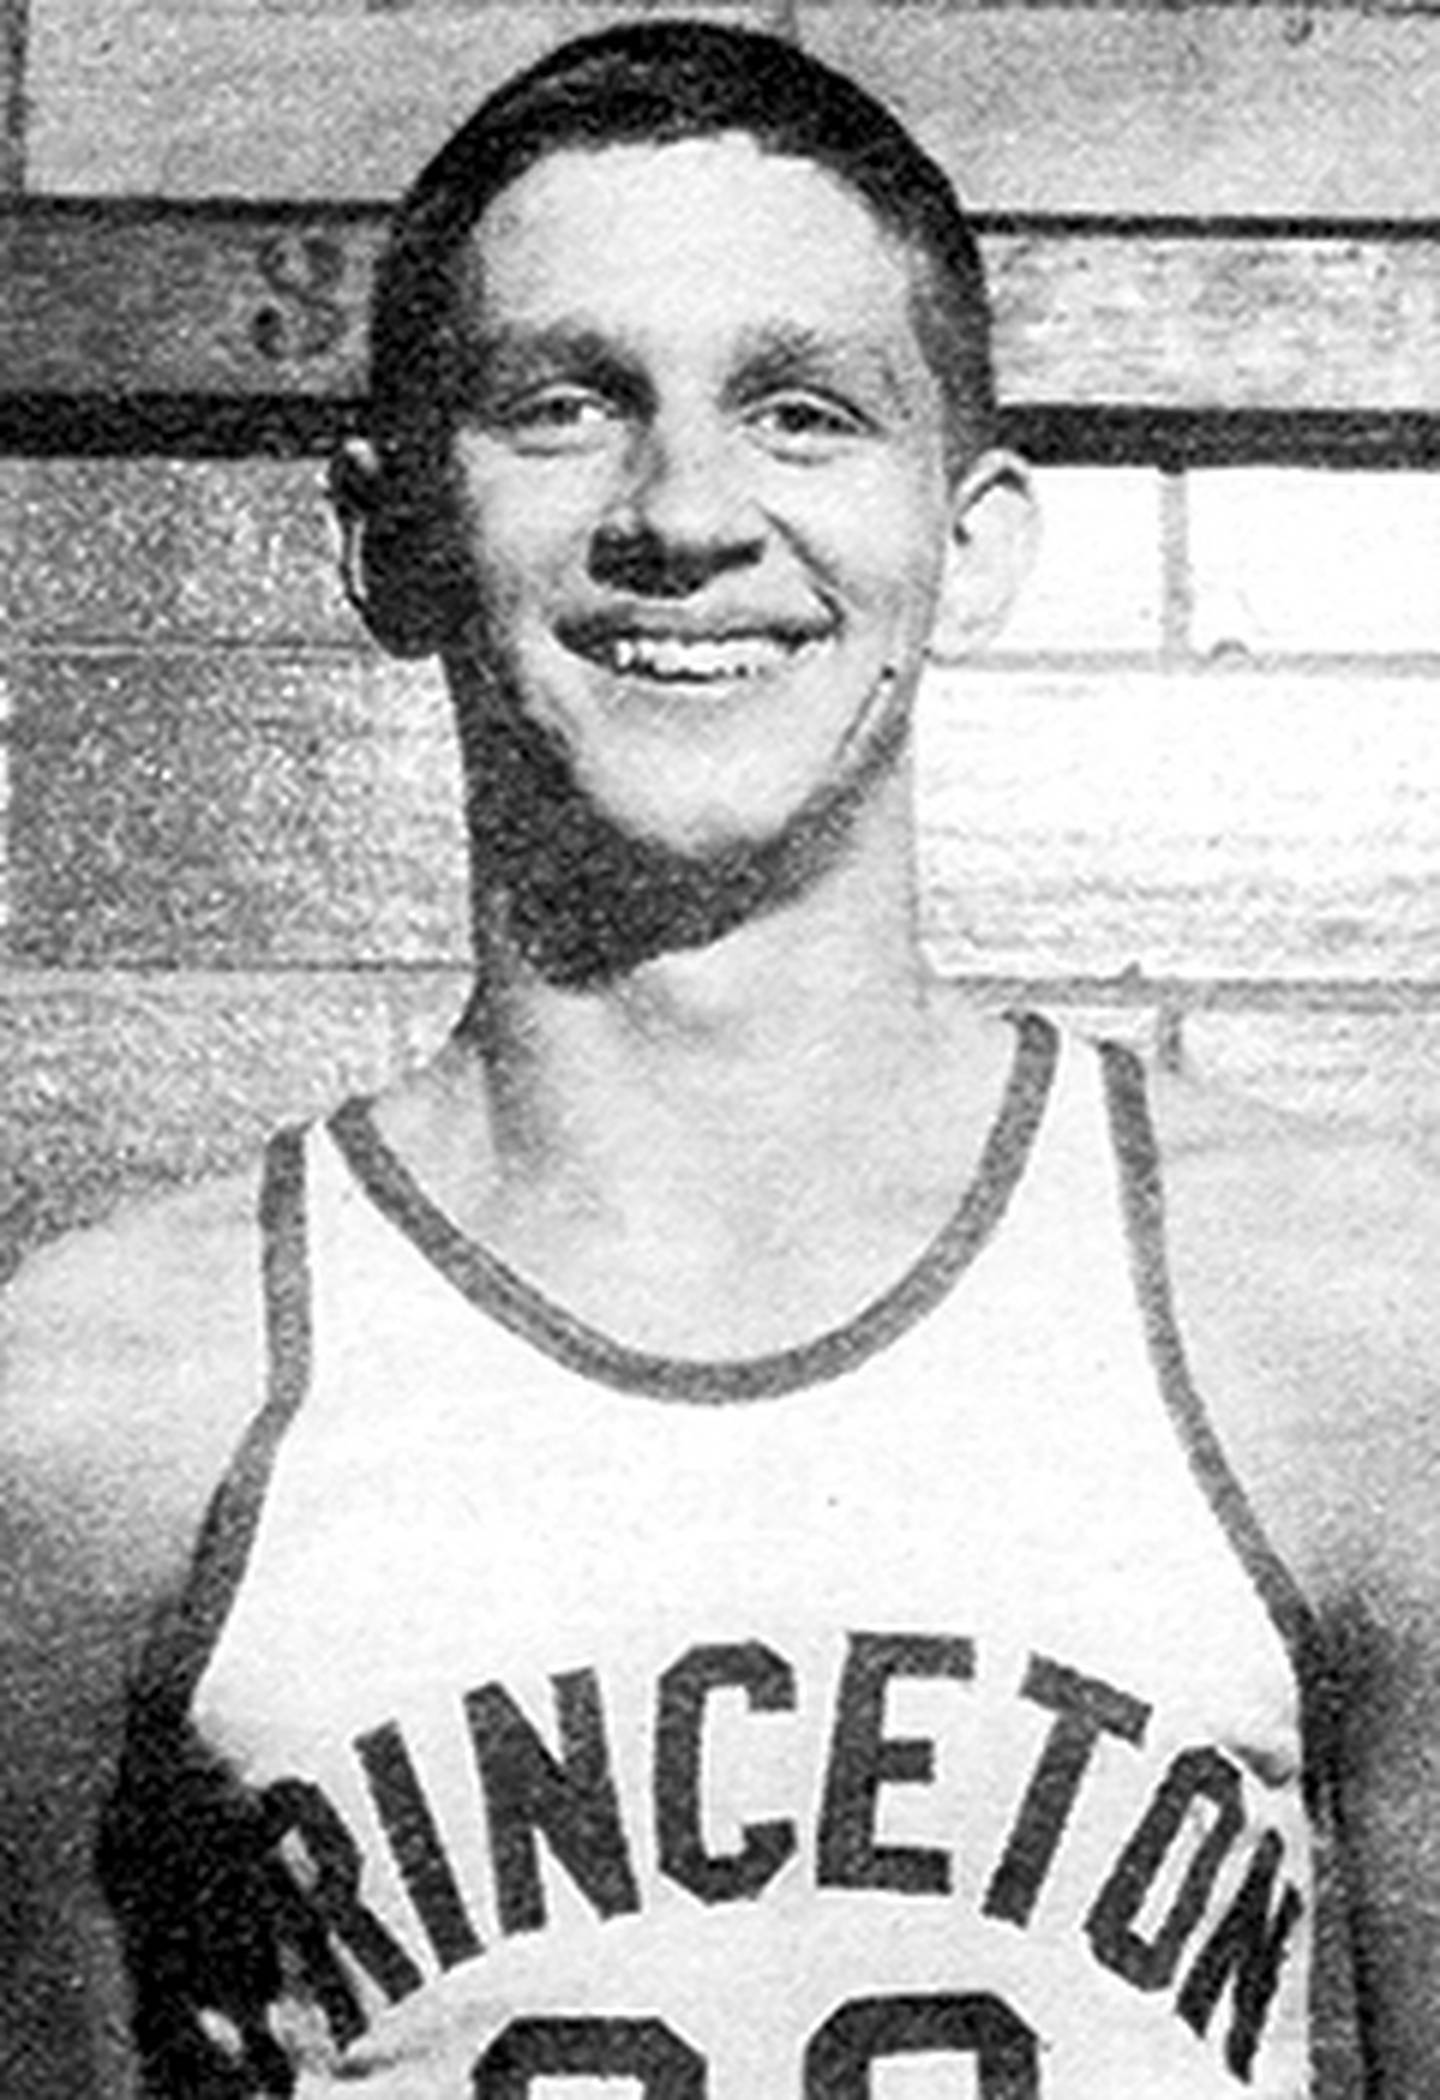 Legendary Princeton great Joe Ruklick stands as the Tigers' all-time leading scorer with 1,306 career points. He led the 1955 Tigers to a fourth-place finish in the single class system.